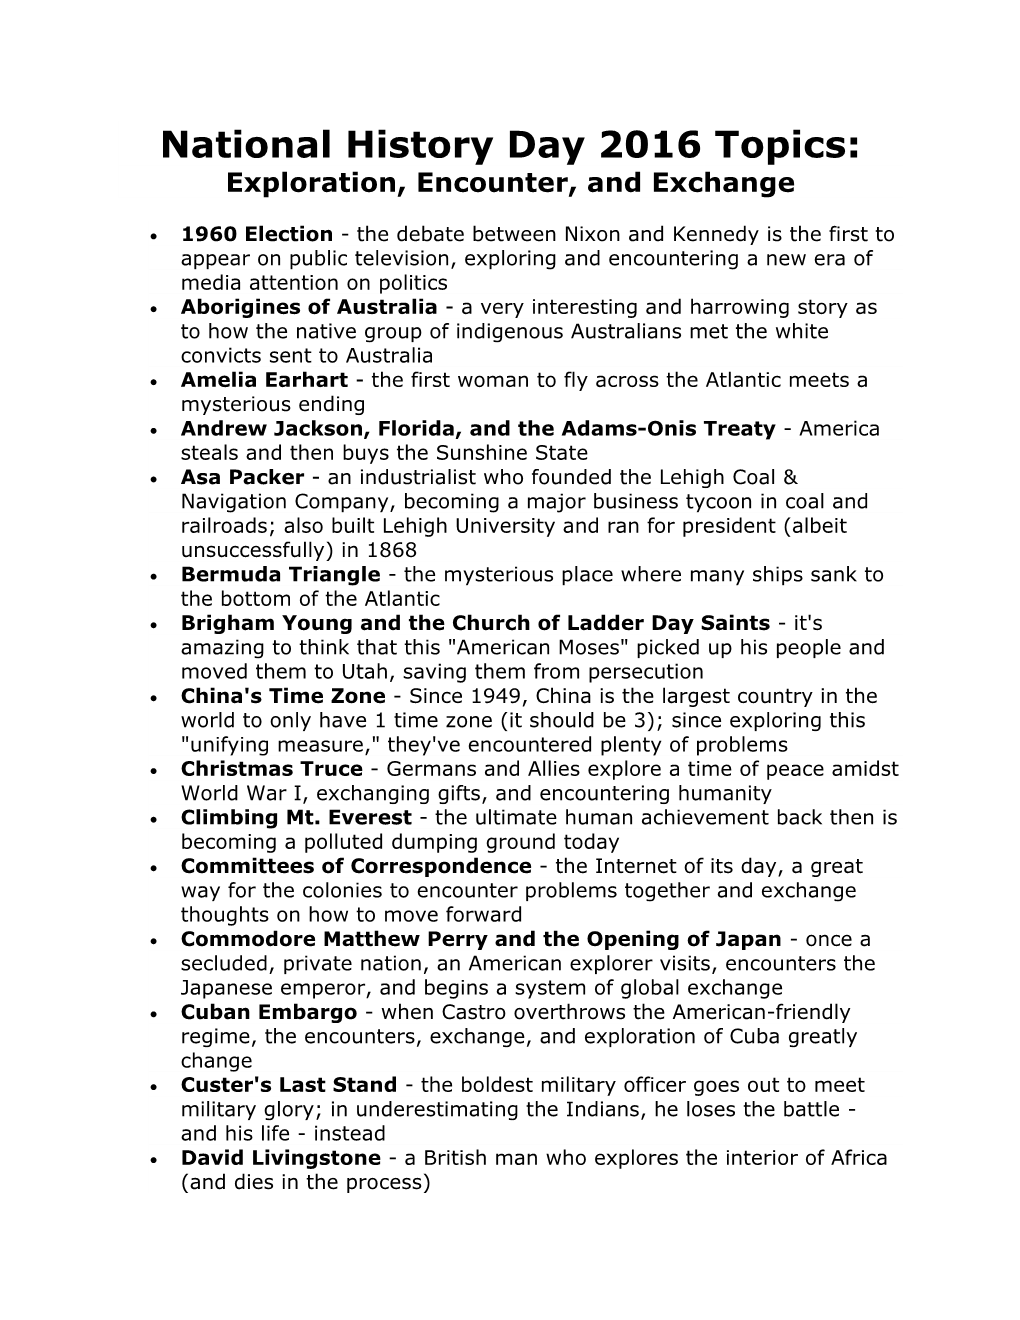 National History Day 2016 Topics: Exploration, Encounter, and Exchange